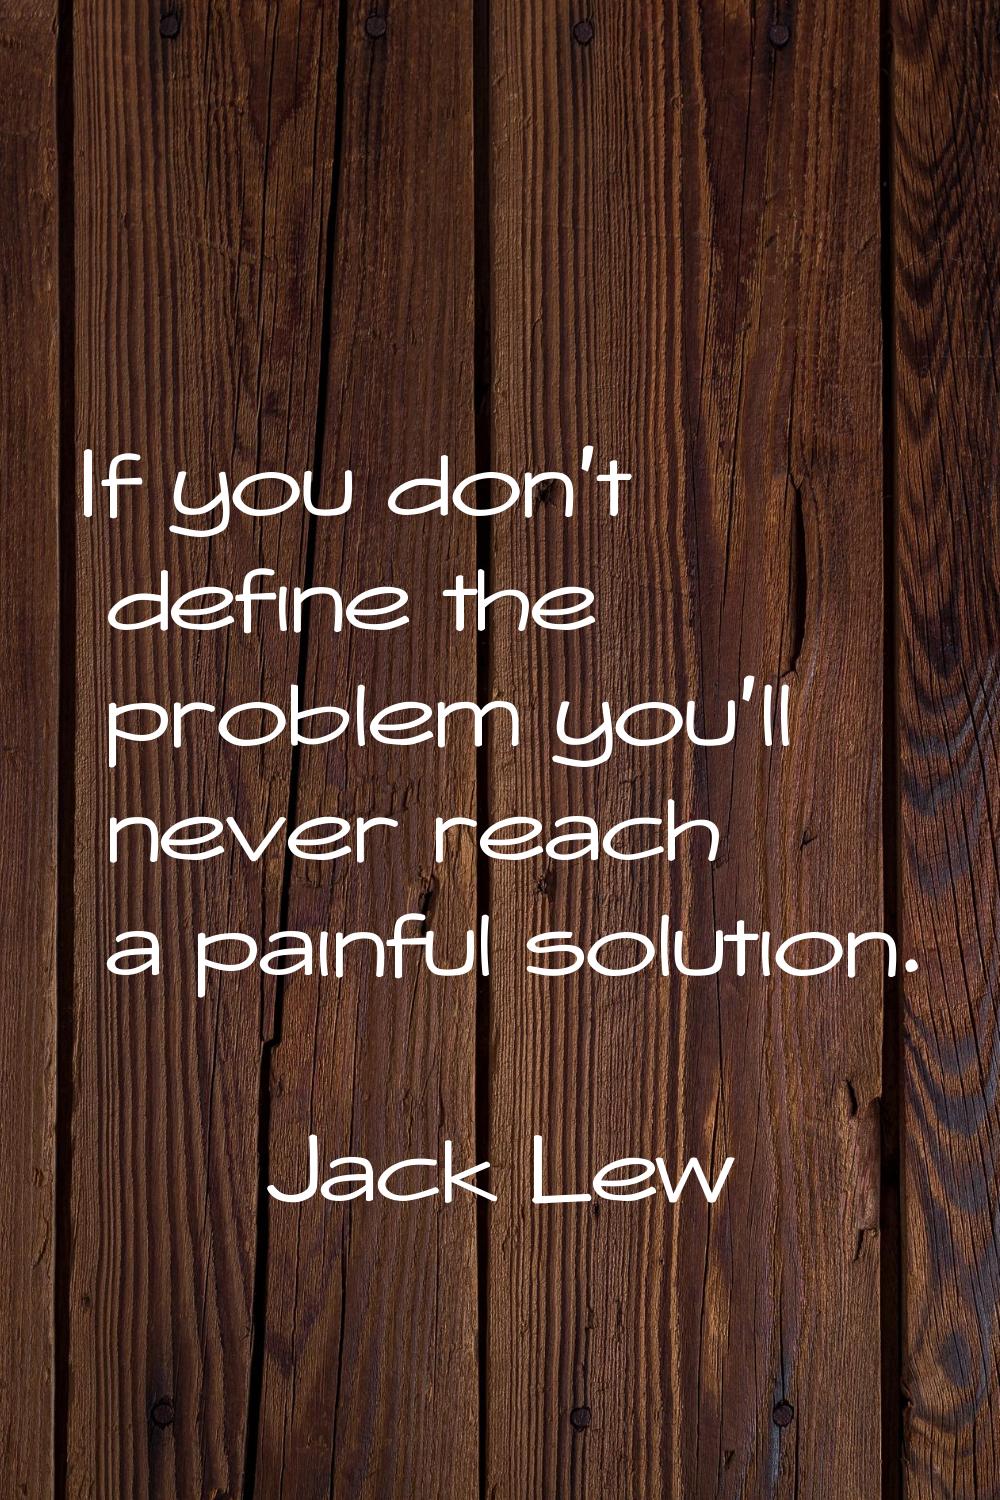 If you don't define the problem you'll never reach a painful solution.